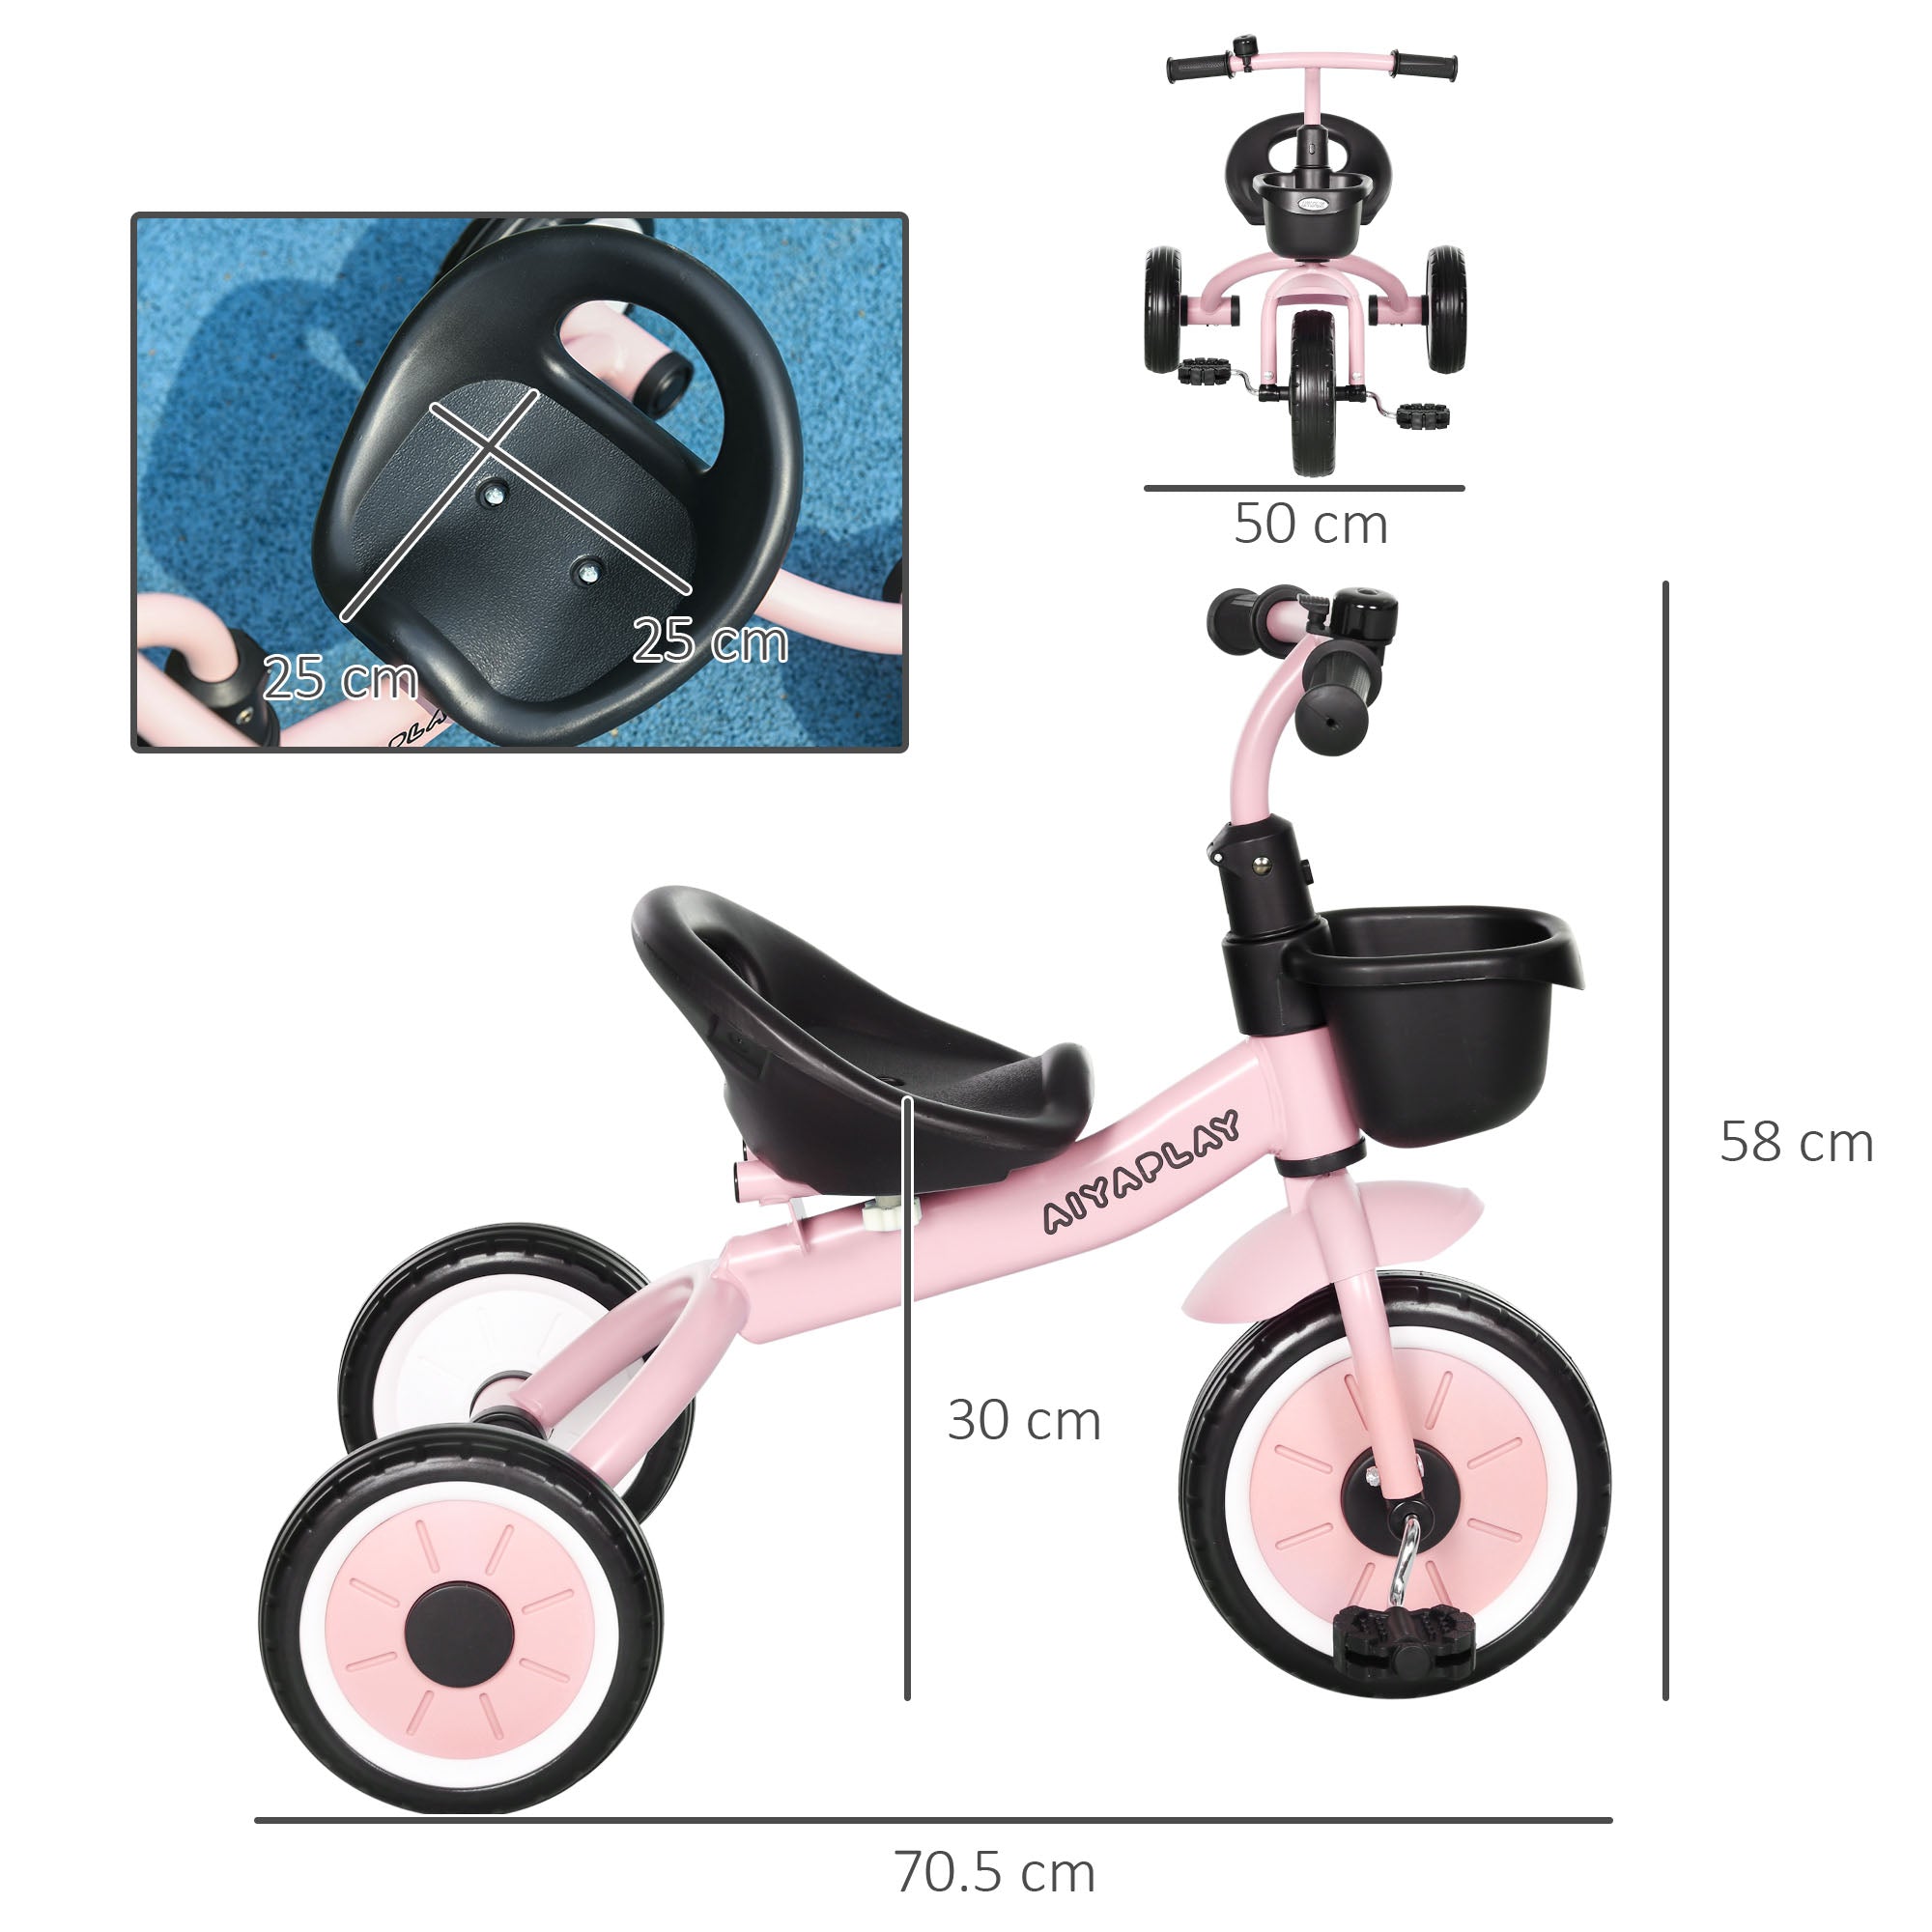 Kids Trike, Tricycle, with Adjustable Seat, Basket, Bell, for Ages 2-5 Years - Pink-2